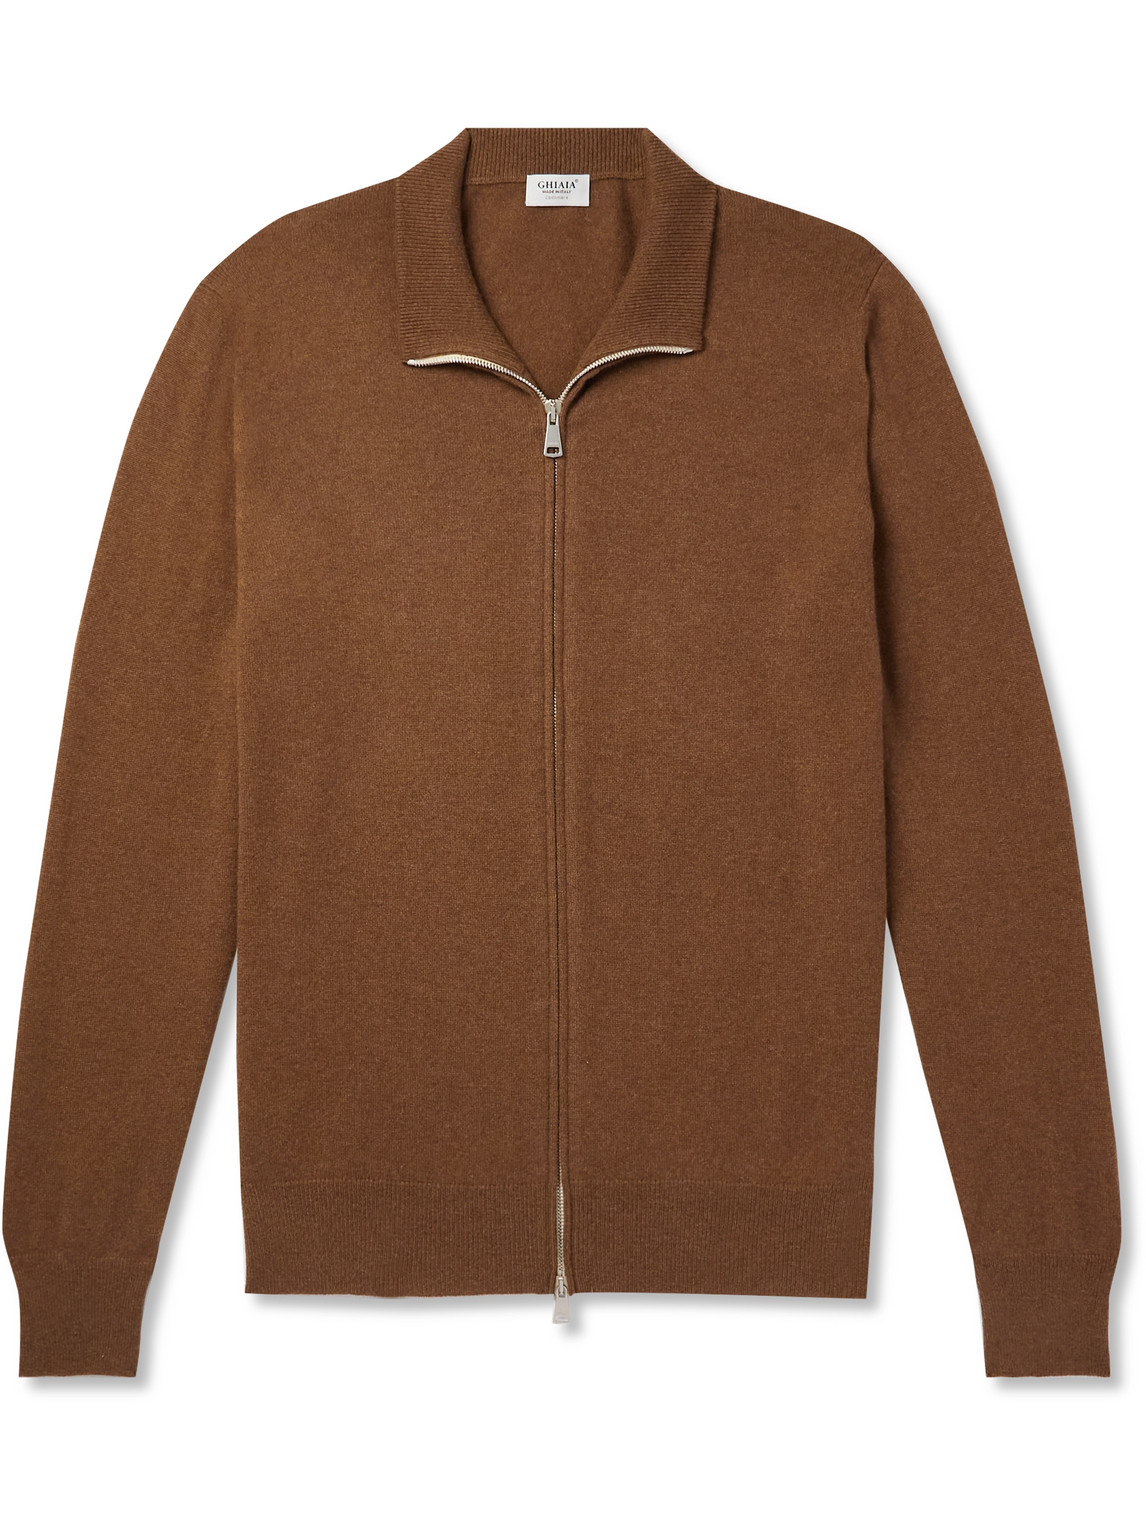 Ghiaia Cashmere Cashmere Zip-Up Sweater